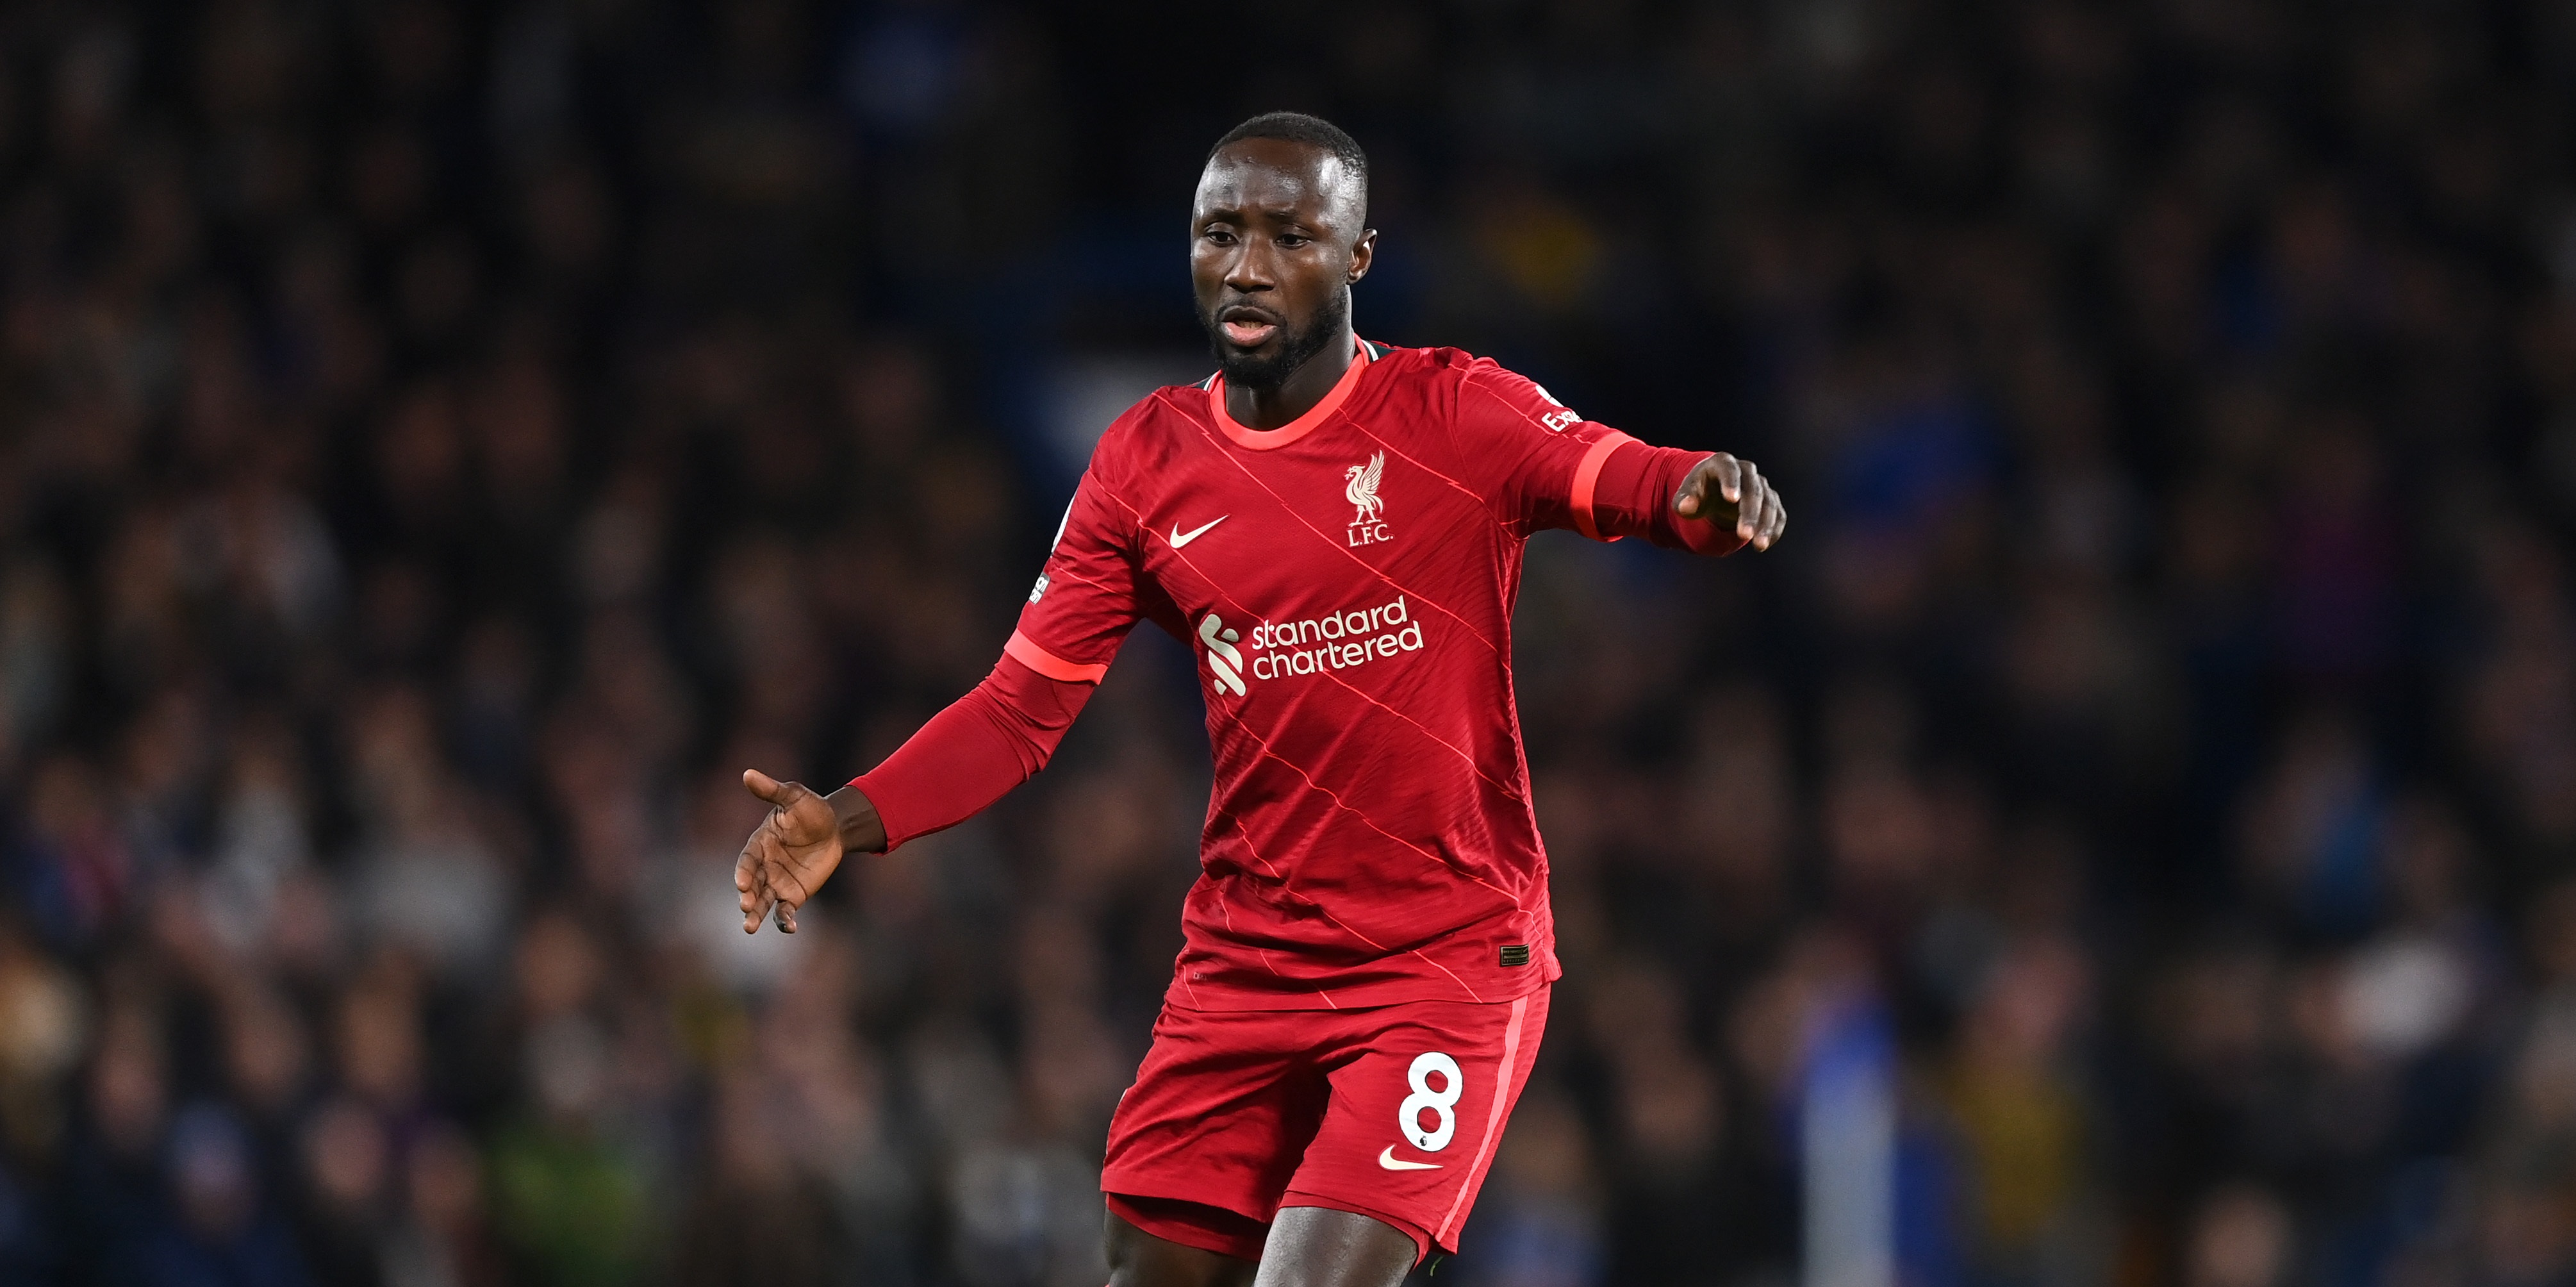 Barcelona’s reported interest in Naby Keita handed significant boost as Coutinho clause expired